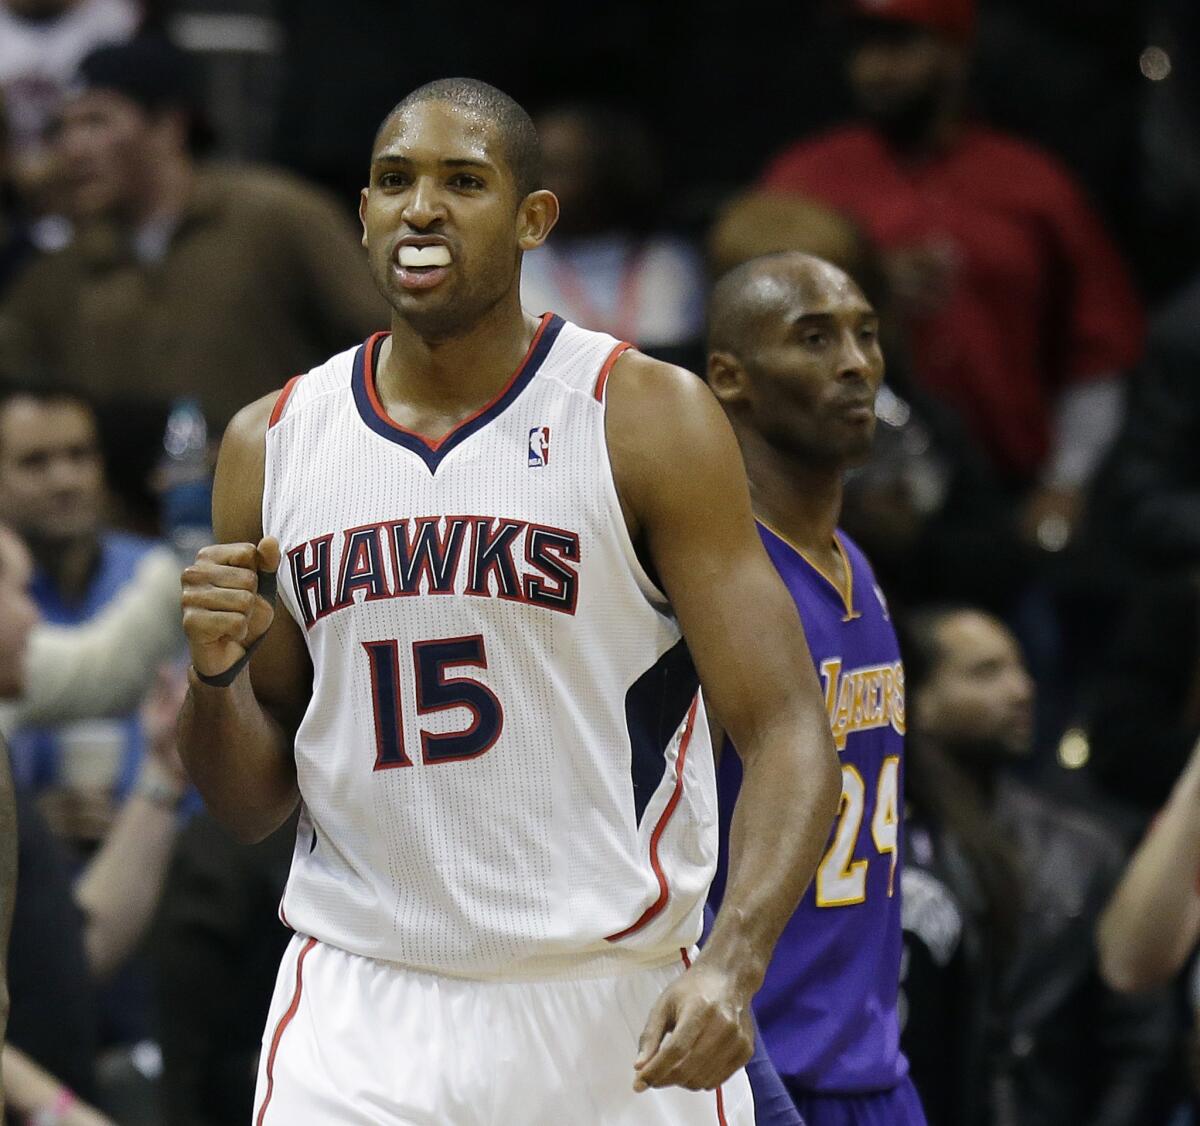 Hawks forward Al Horford pumps his fist in front of Lakers star Kobe Bryant after scoring a basket during a Dec. 16, 2013, game in Atlanta.